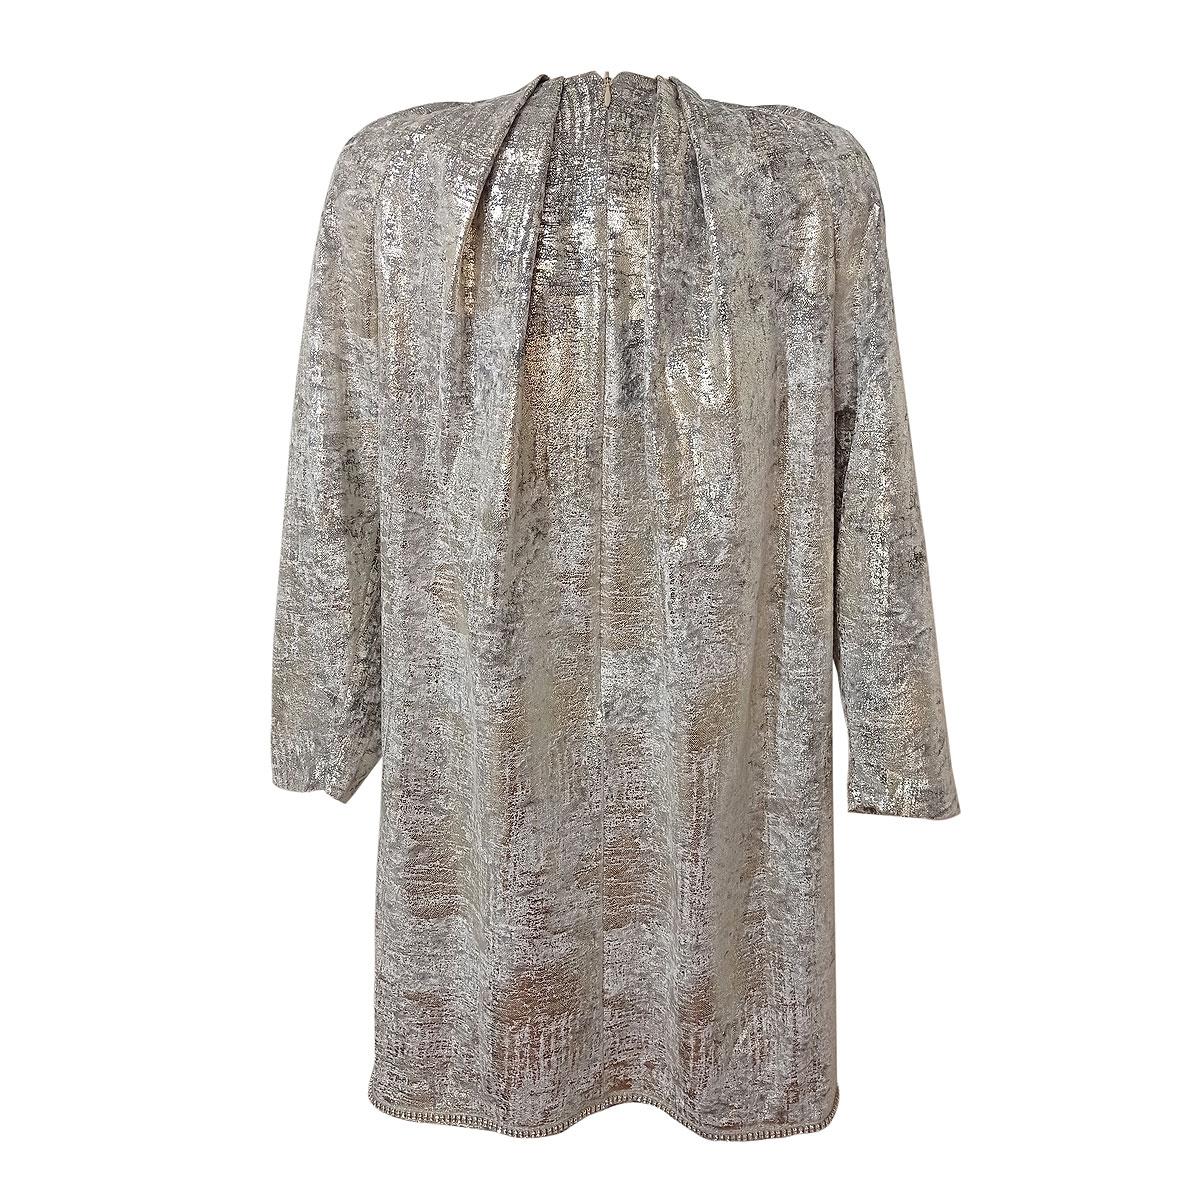 Beautiful,chic and brand new dress by Gianluca Capannolo
Polyester, polyamide and elasthane
Silver color
Long sleeve
Strass inserts
Shoulder/hem cm 82 (32,2 inches)
Shoulder cm 40 (15,7 inches)
Worldwide express shipping included in the price !